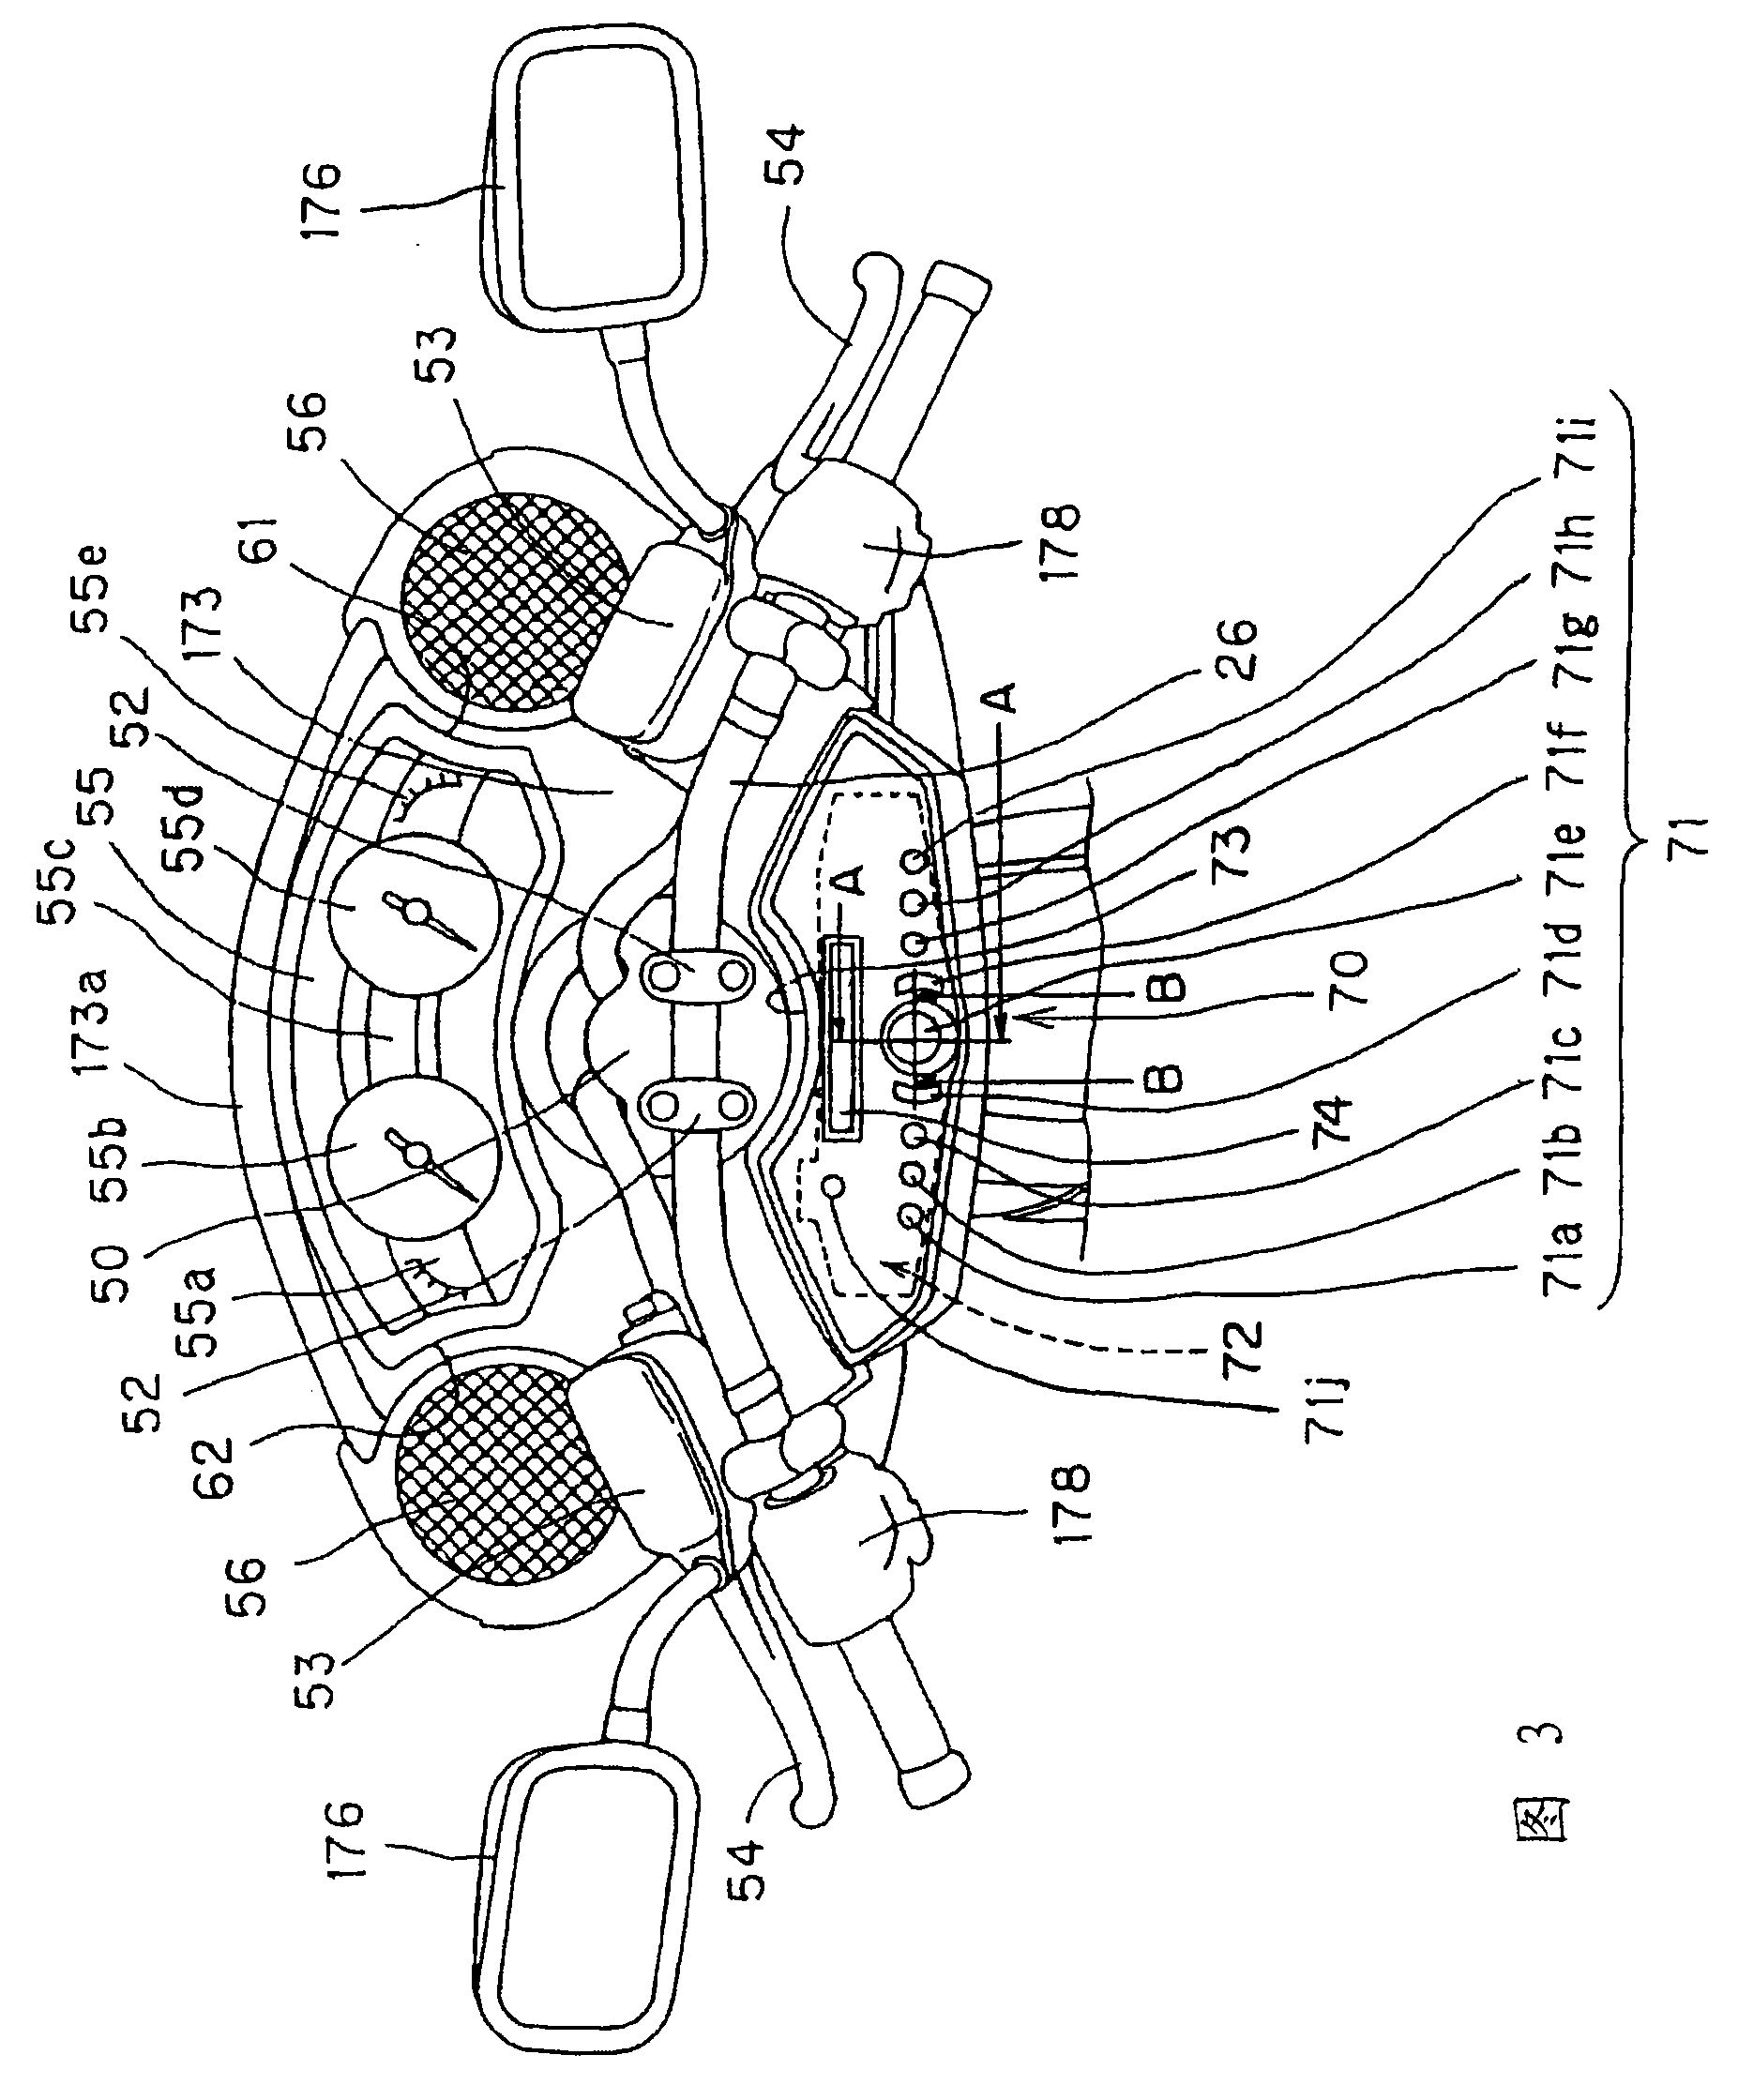 Mounting structure for sound apparatus of two-wheeled vehicle